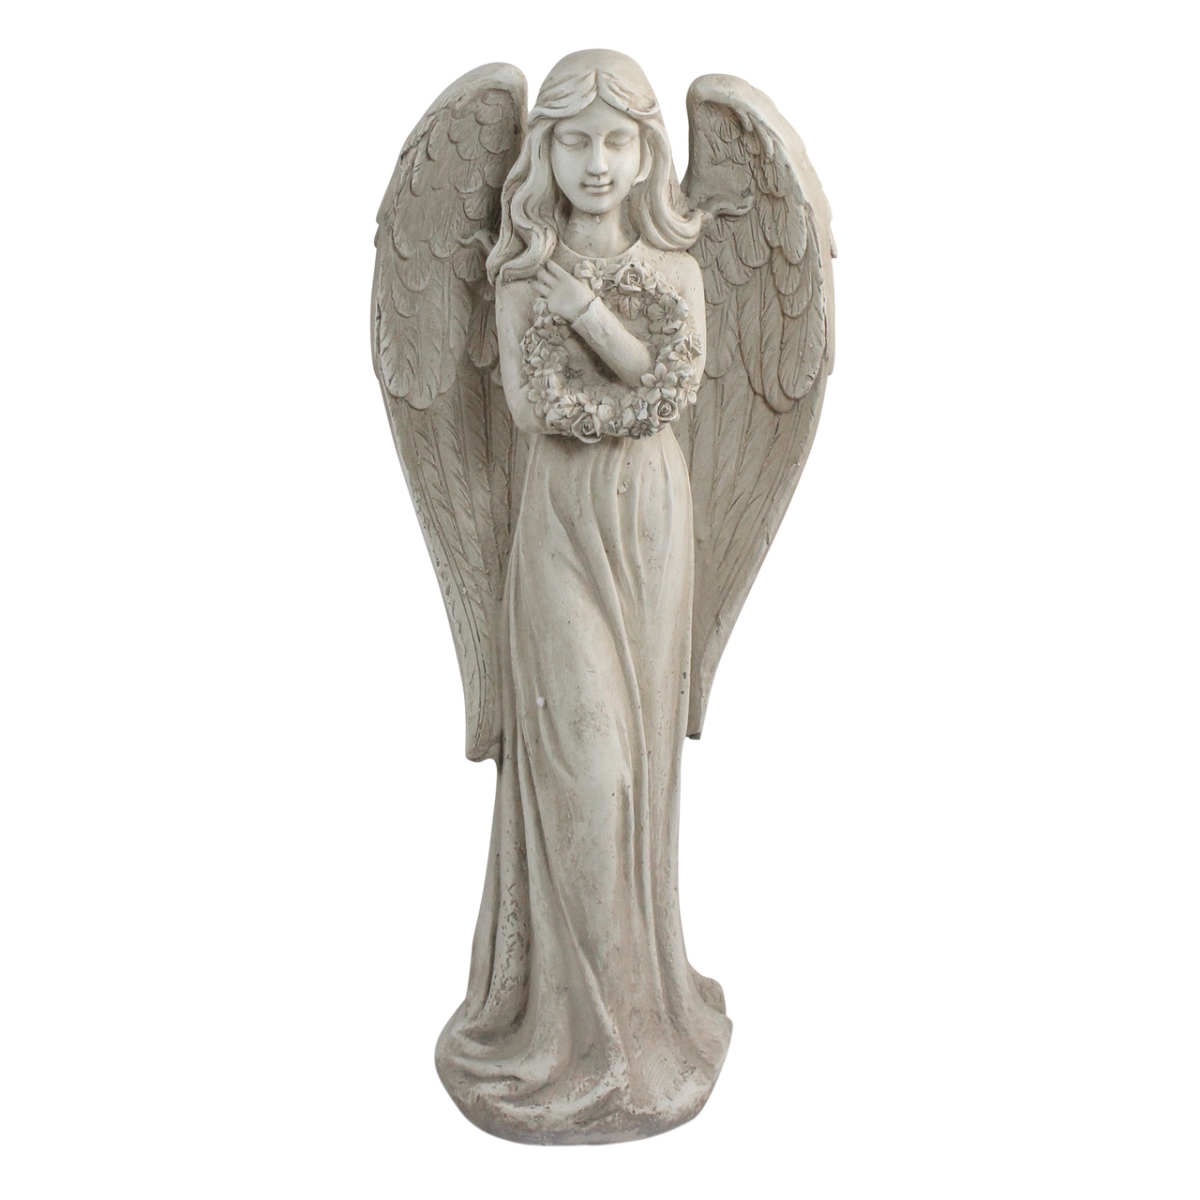 33377629 22 In. Peaceful Angel Holding A Floral Wreath Outdoor Garden Statue